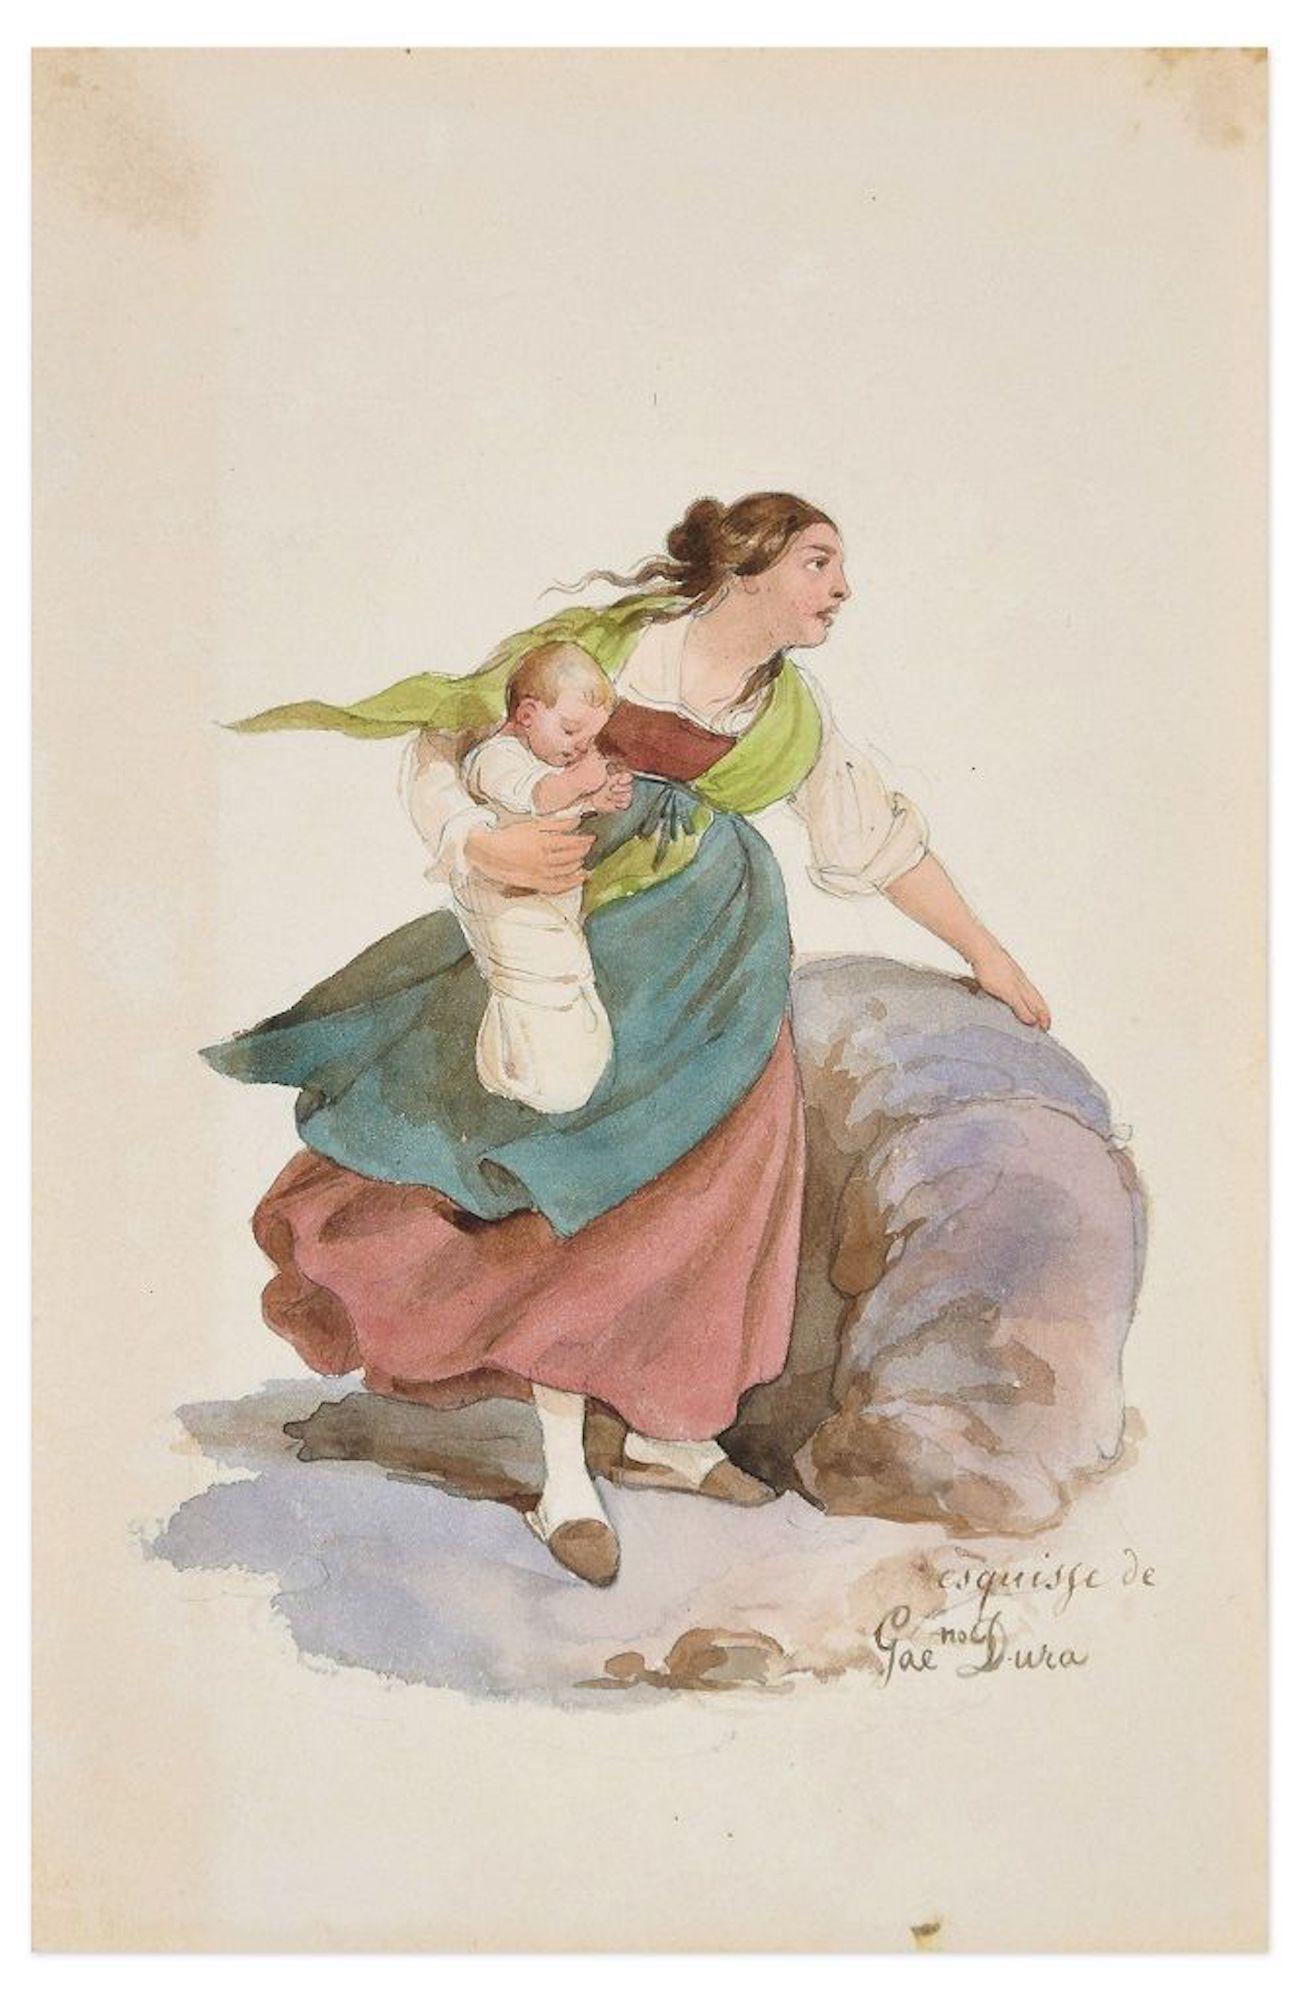 Woman - Original Ink Drawing and Watercolor by G. Dura - 19th Century